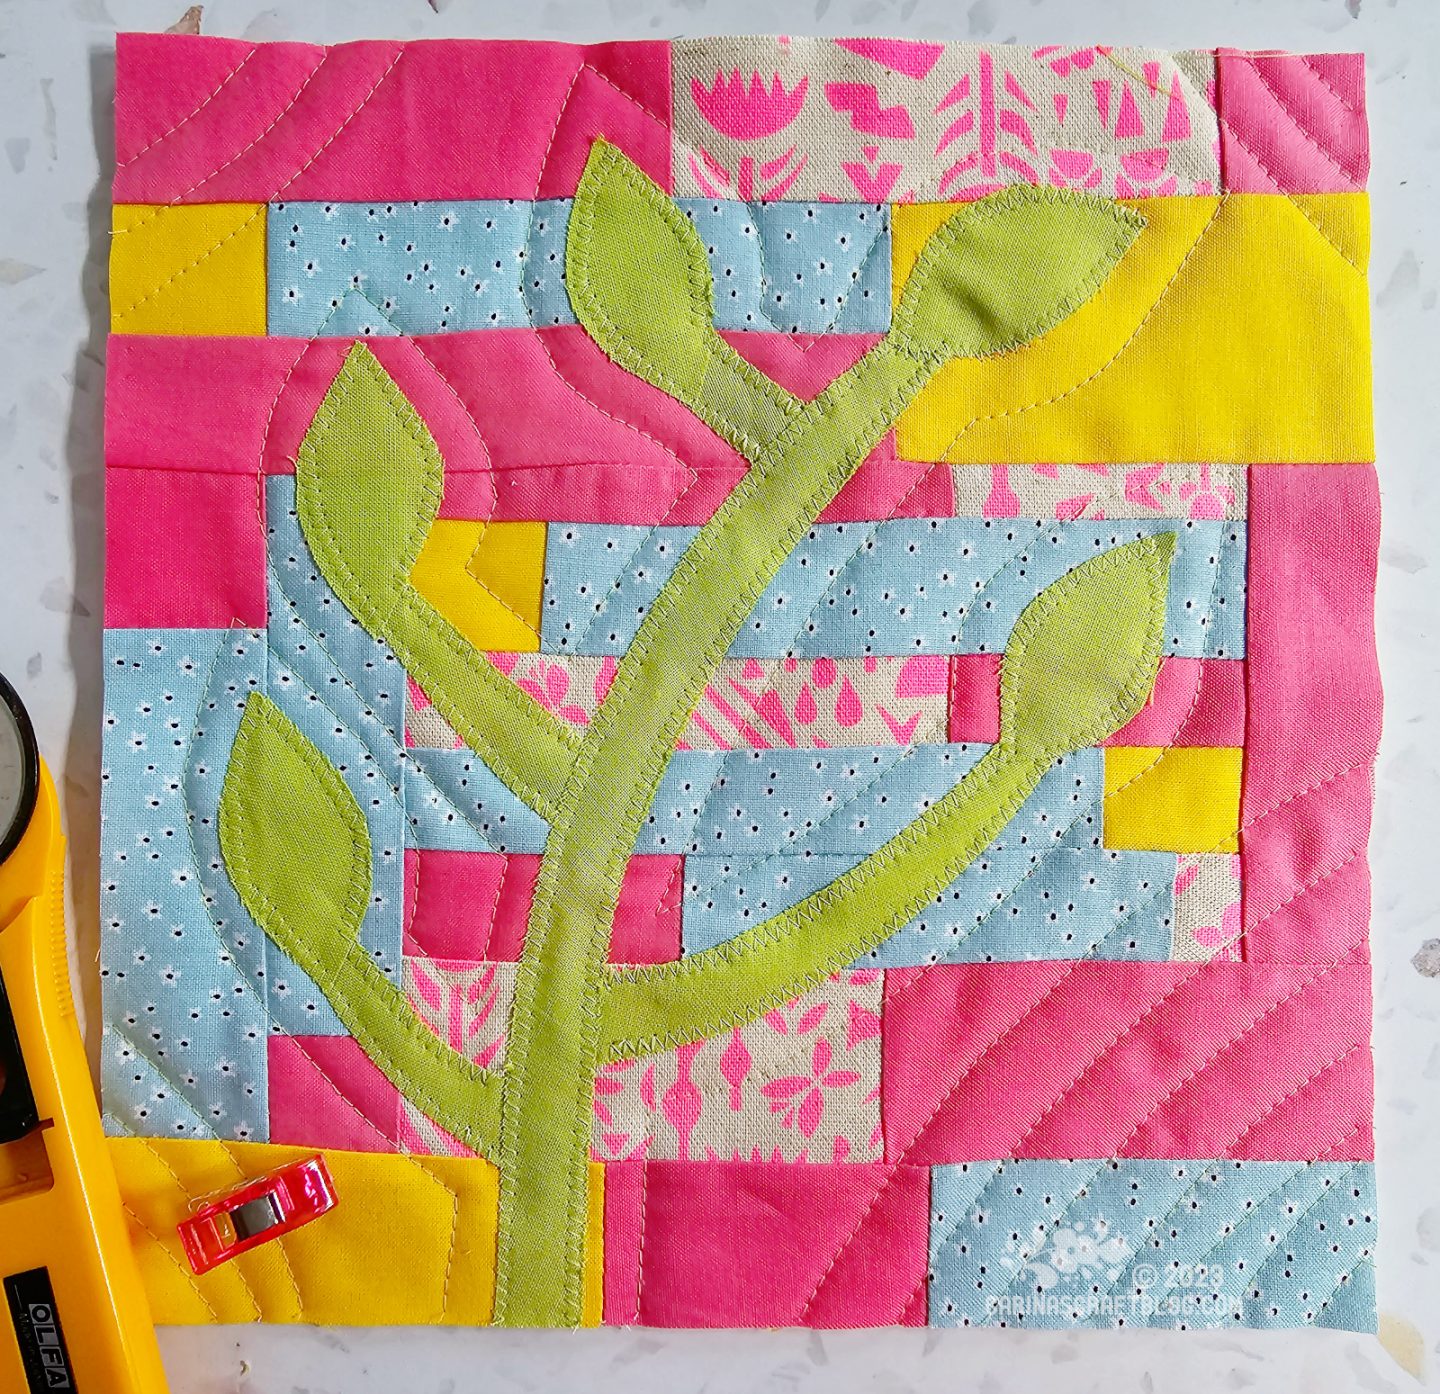 Small square quilt made of narrow strips in pink, blue and yellow, with a green branch appliquéd on top.